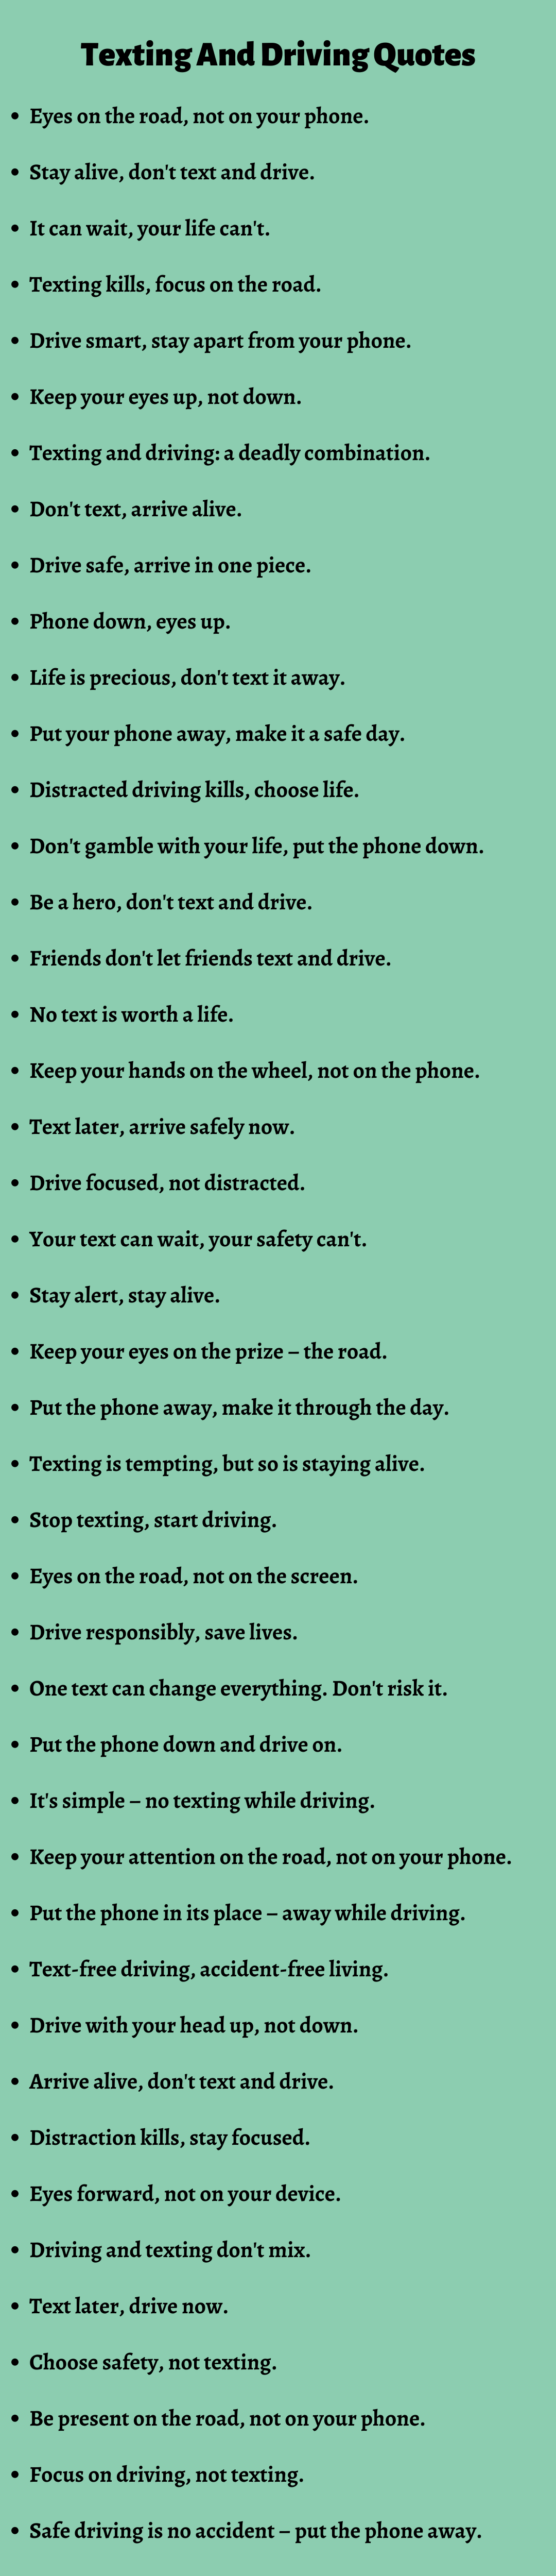 Texting And Driving Quotes (2)